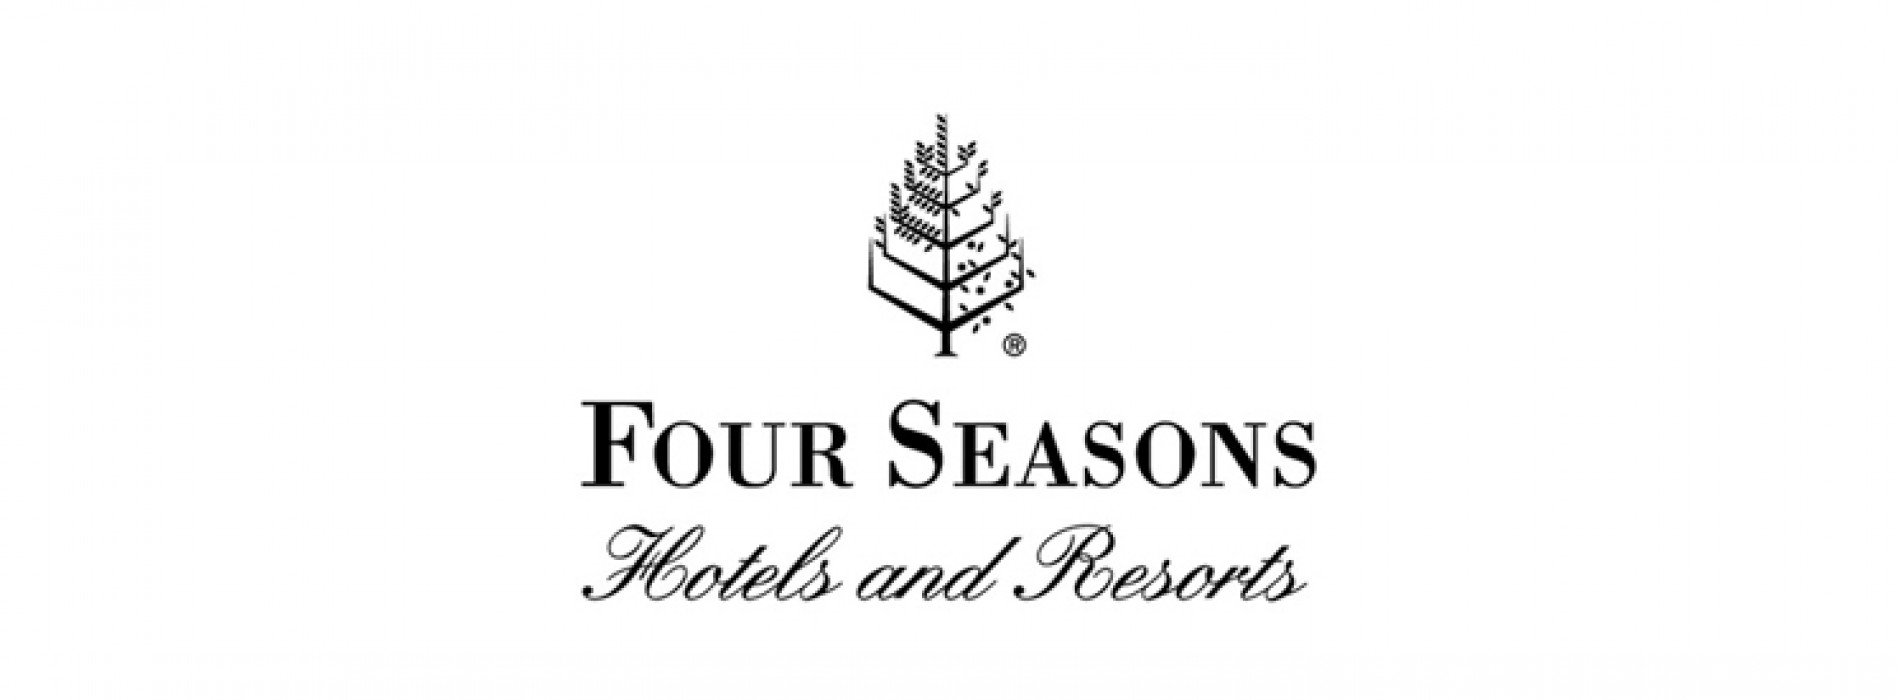 Four Seasons launches new app for Chinese travellers